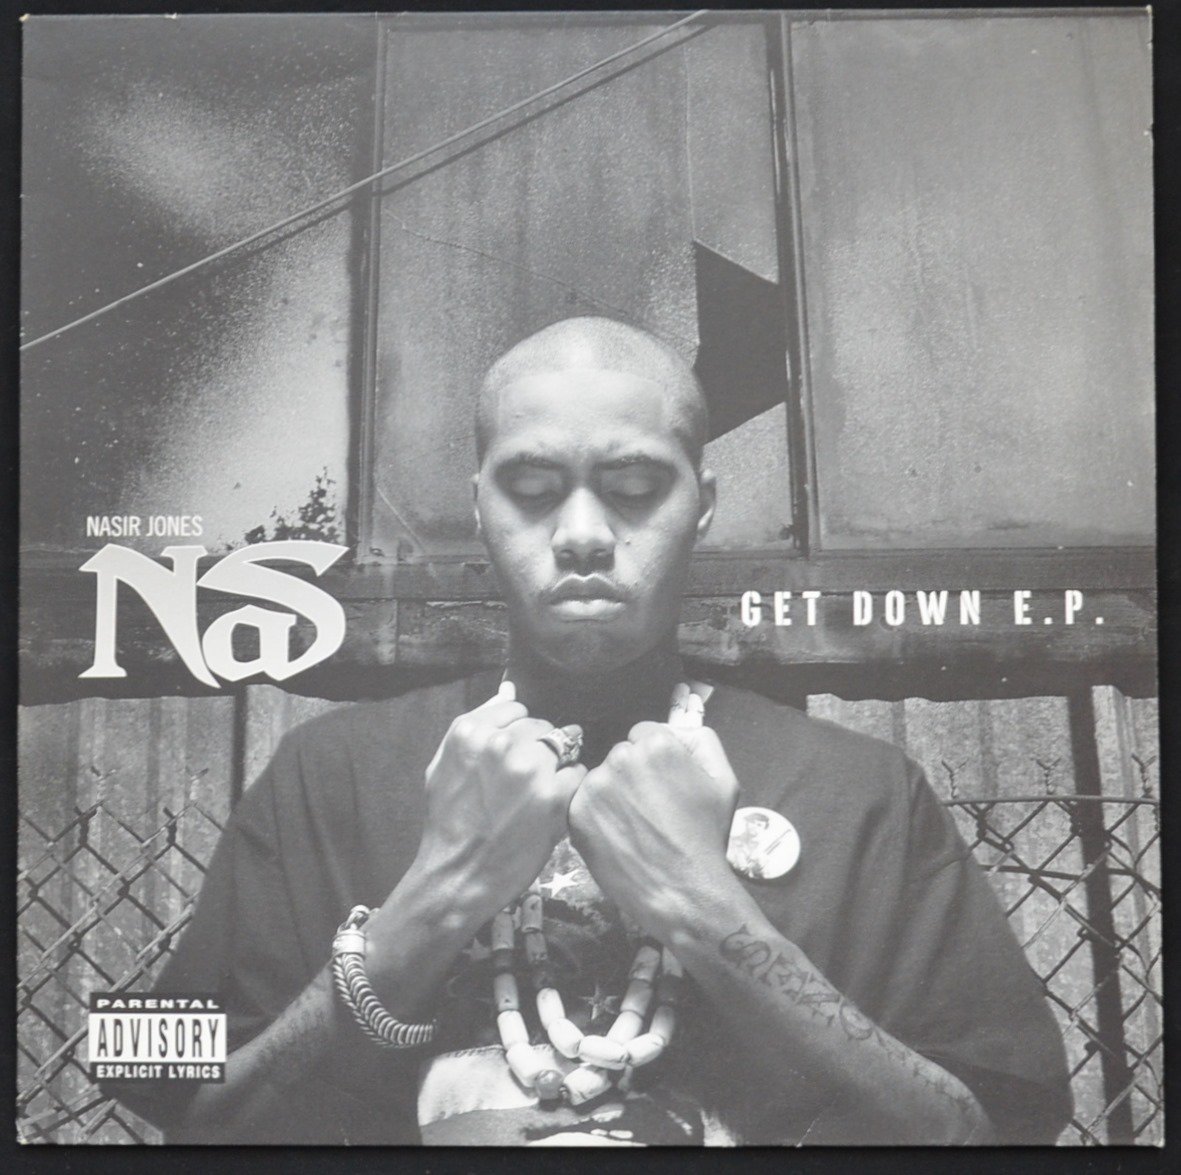 NAS / GET DOWN / N.Y. STATE OF MIND GET DOWN E.P. (12